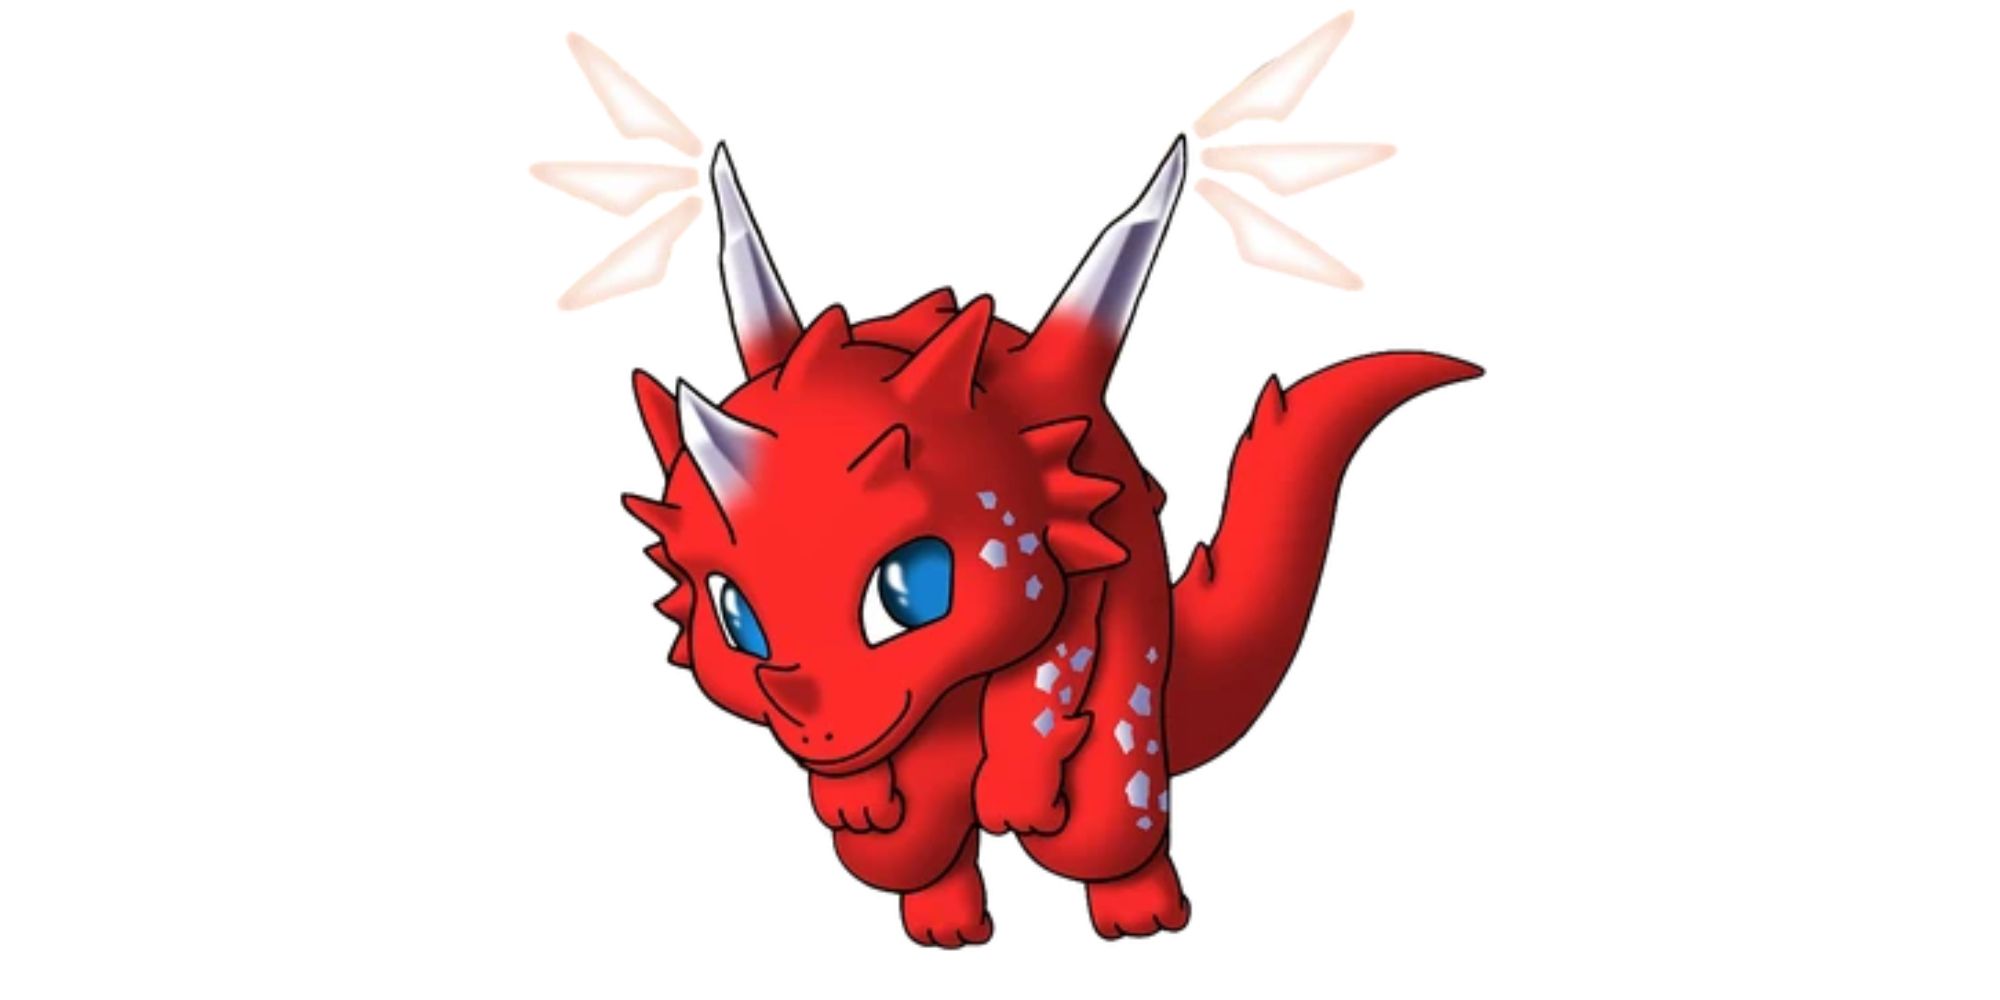 A red Fiery Dragling from Dragon Quest Treasures